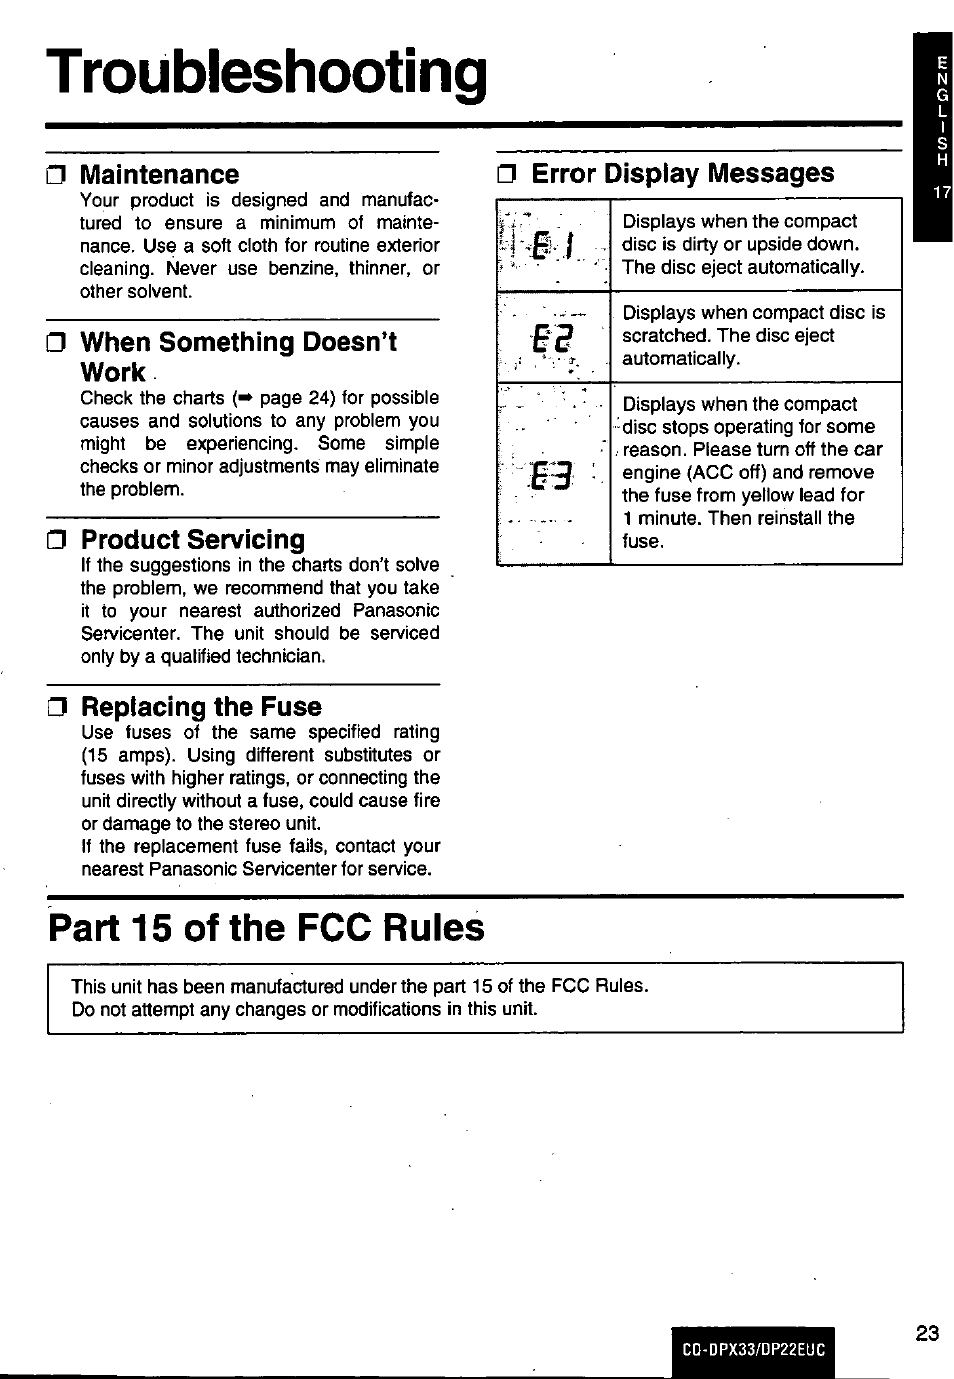 Troubleshooting, Maintenance, When something doesn’t work | Product servicing, Replacing the fuse, Error display messages, Part 15 of the fcc rules | Panasonic CQ-DPX33 DP22EUC Manuel d'utilisation | Page 23 / 48